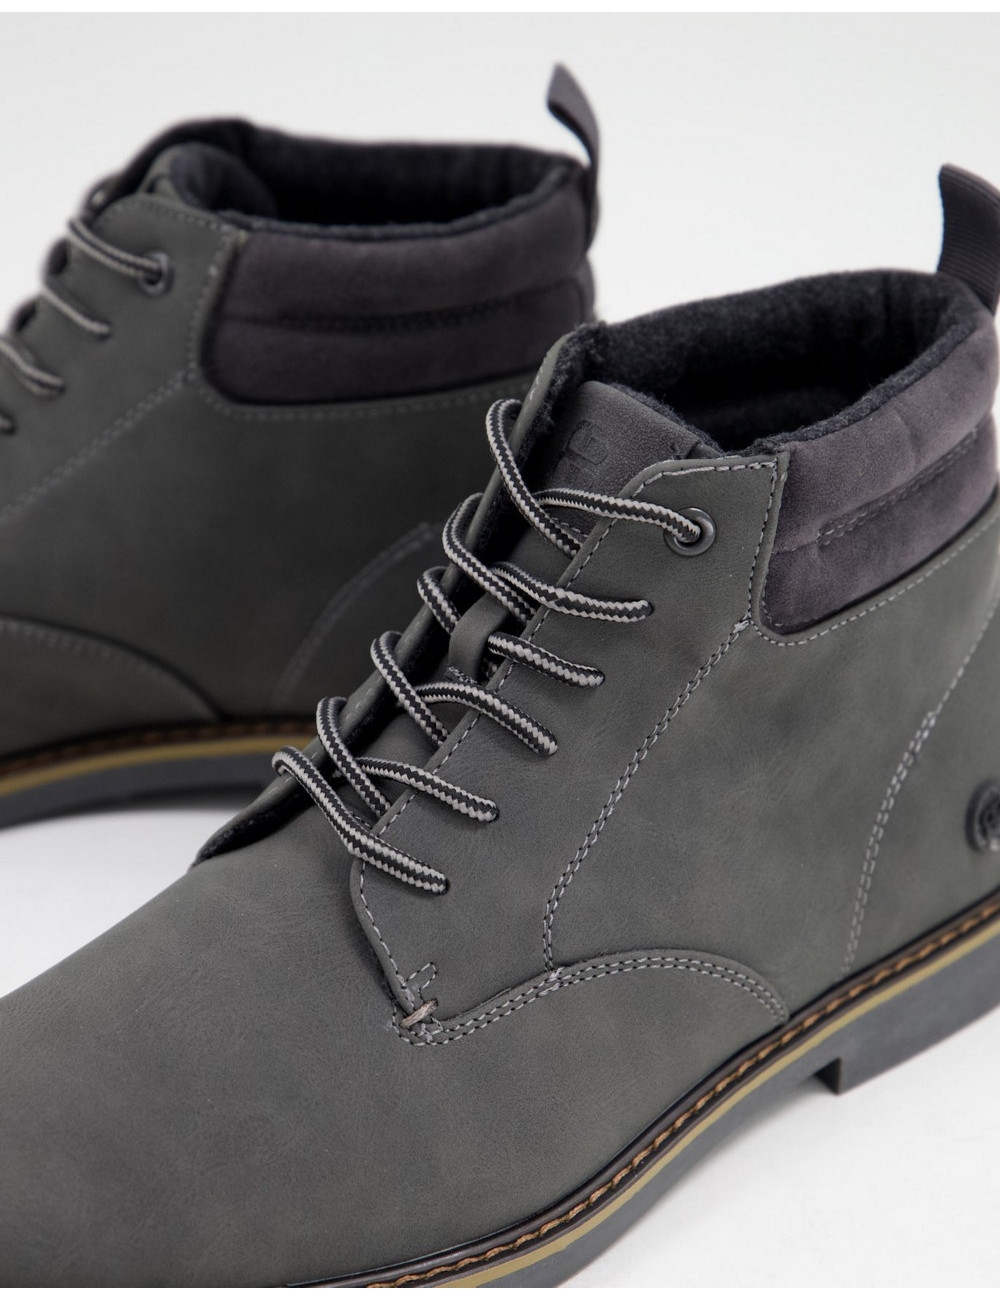 River Island boots in grey